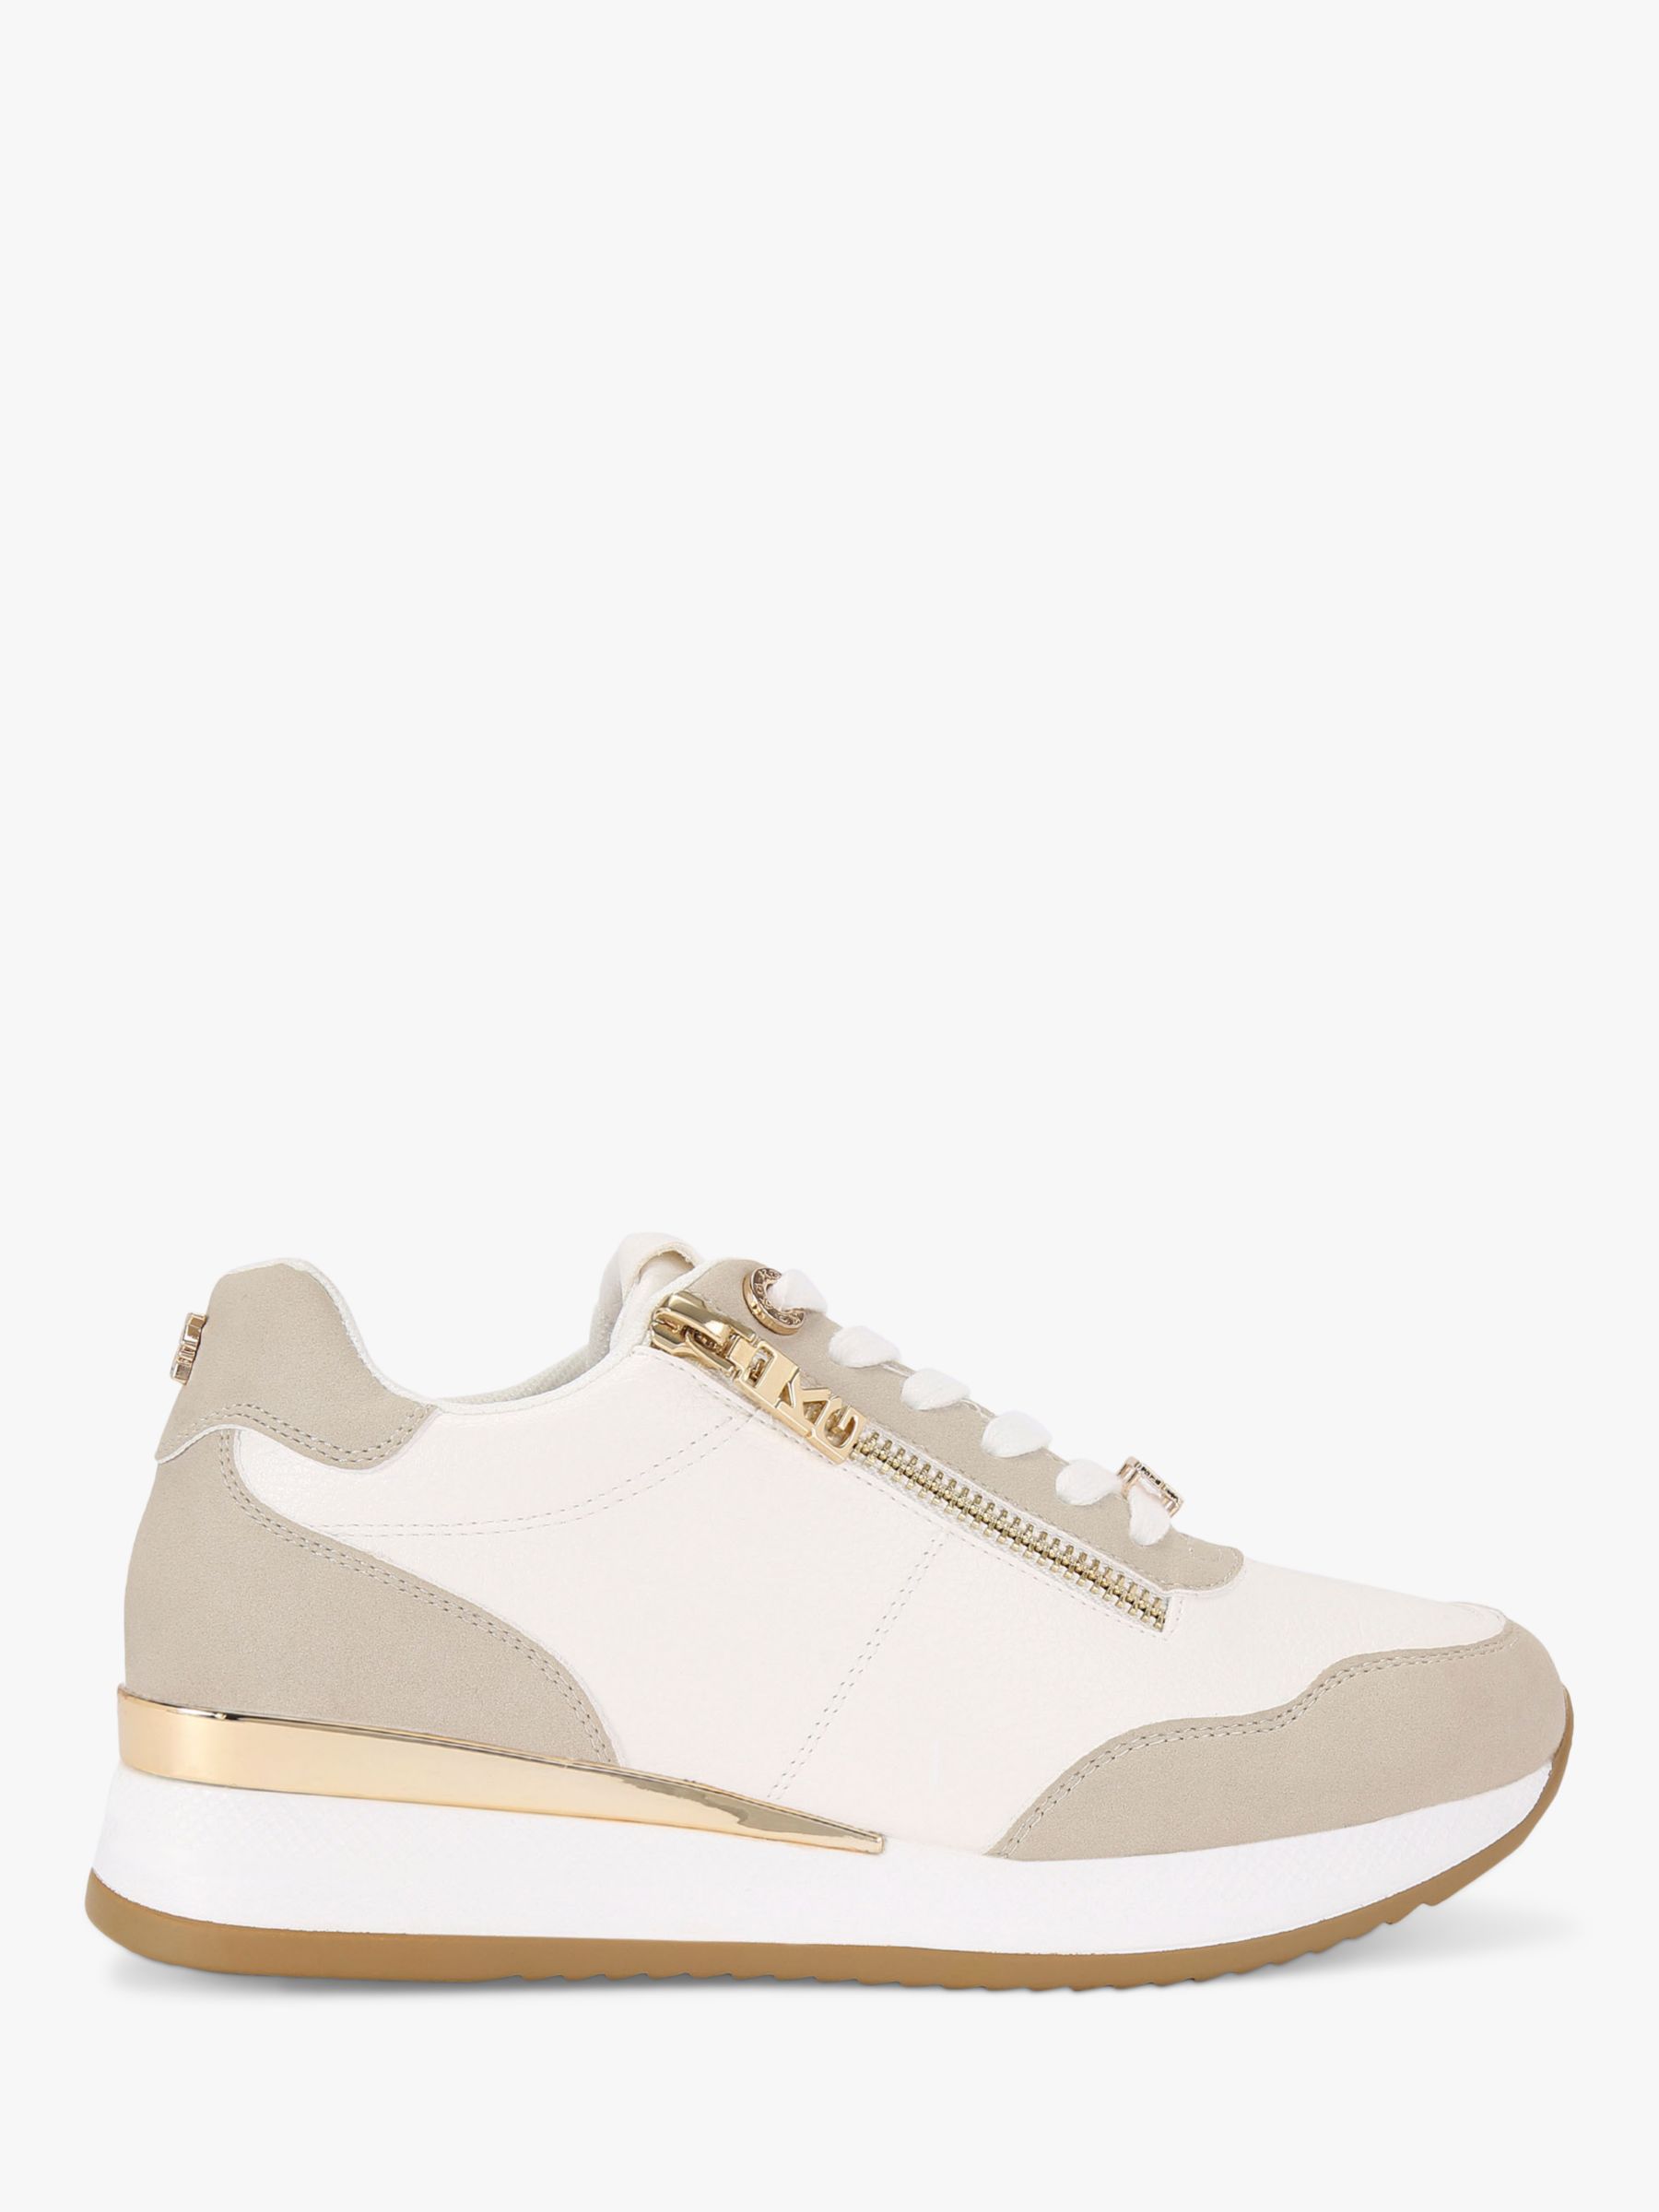 KG Kurt Geiger Lina Chunky Sole Trainers, Taupe at John Lewis & Partners